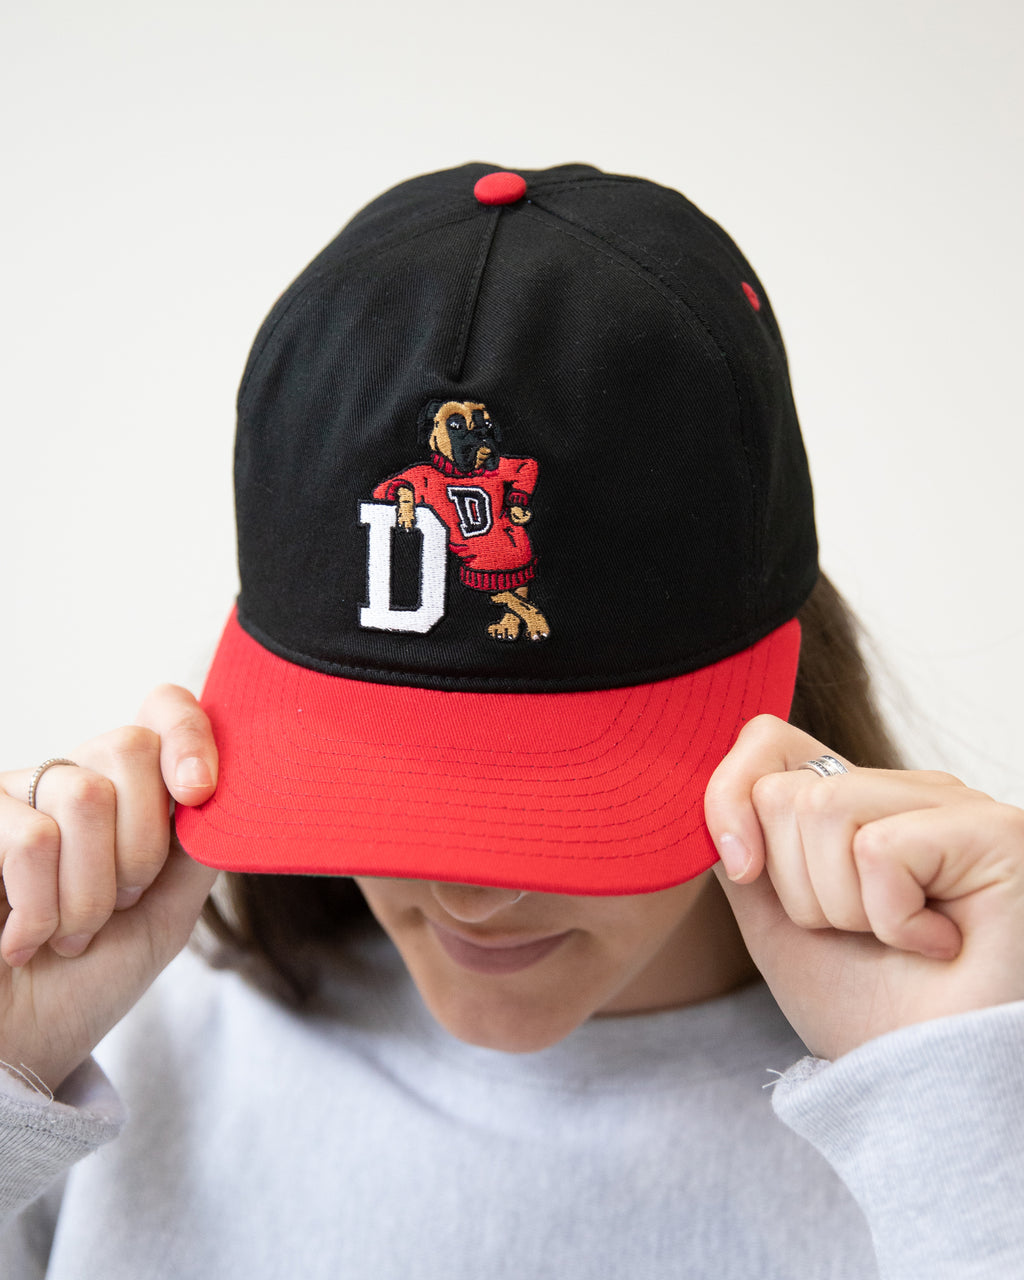 Diogie University | 5-Panel Unstructured Hat | Black and Red